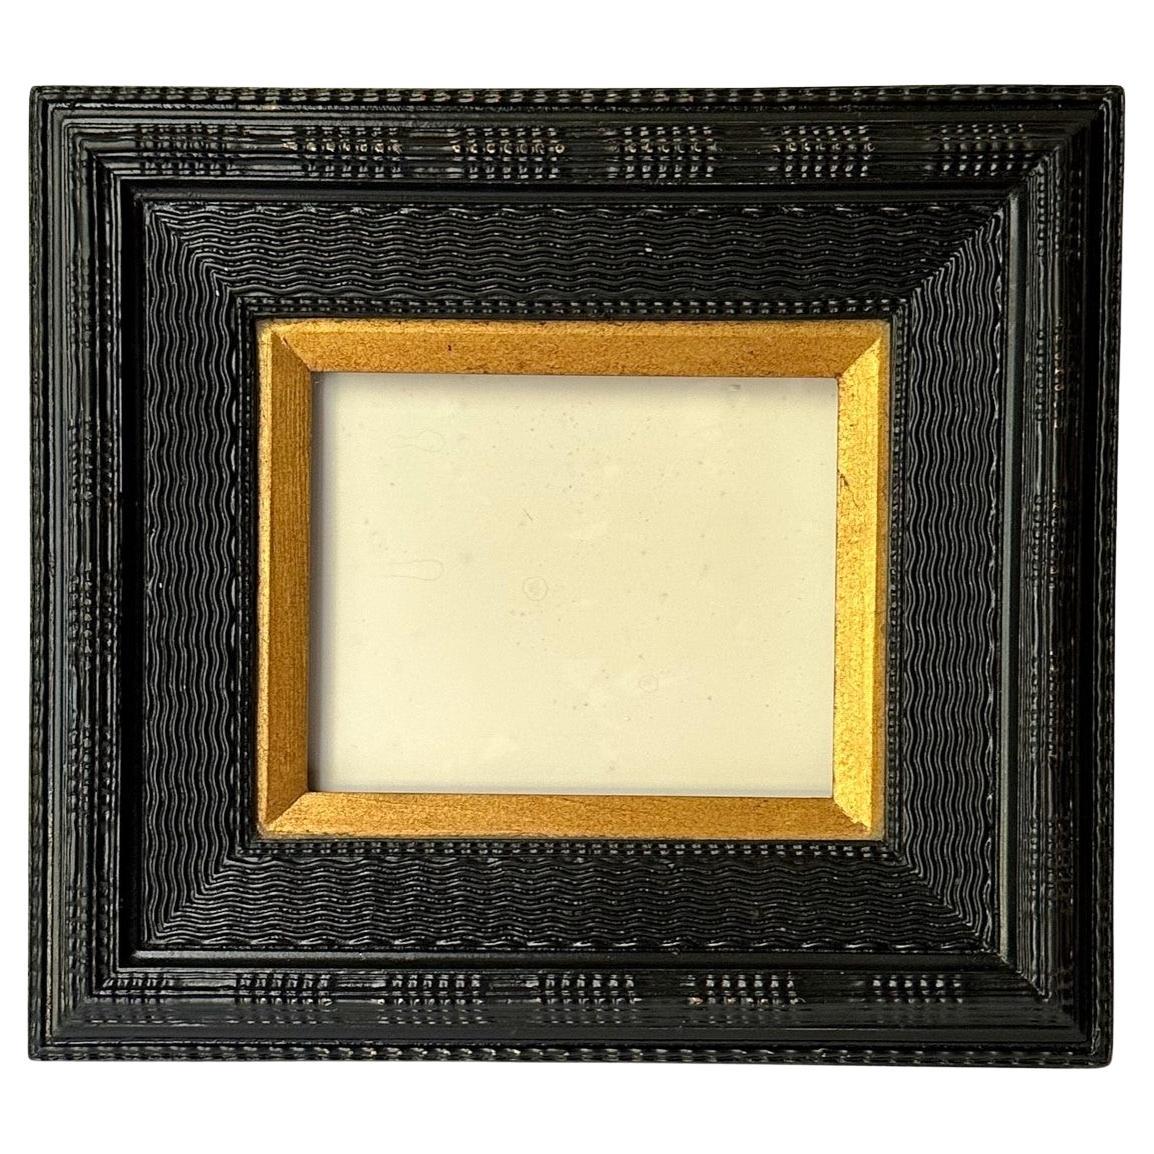 Dutch Ebonized Ripple Molded Picture Frame Early 20th Century.